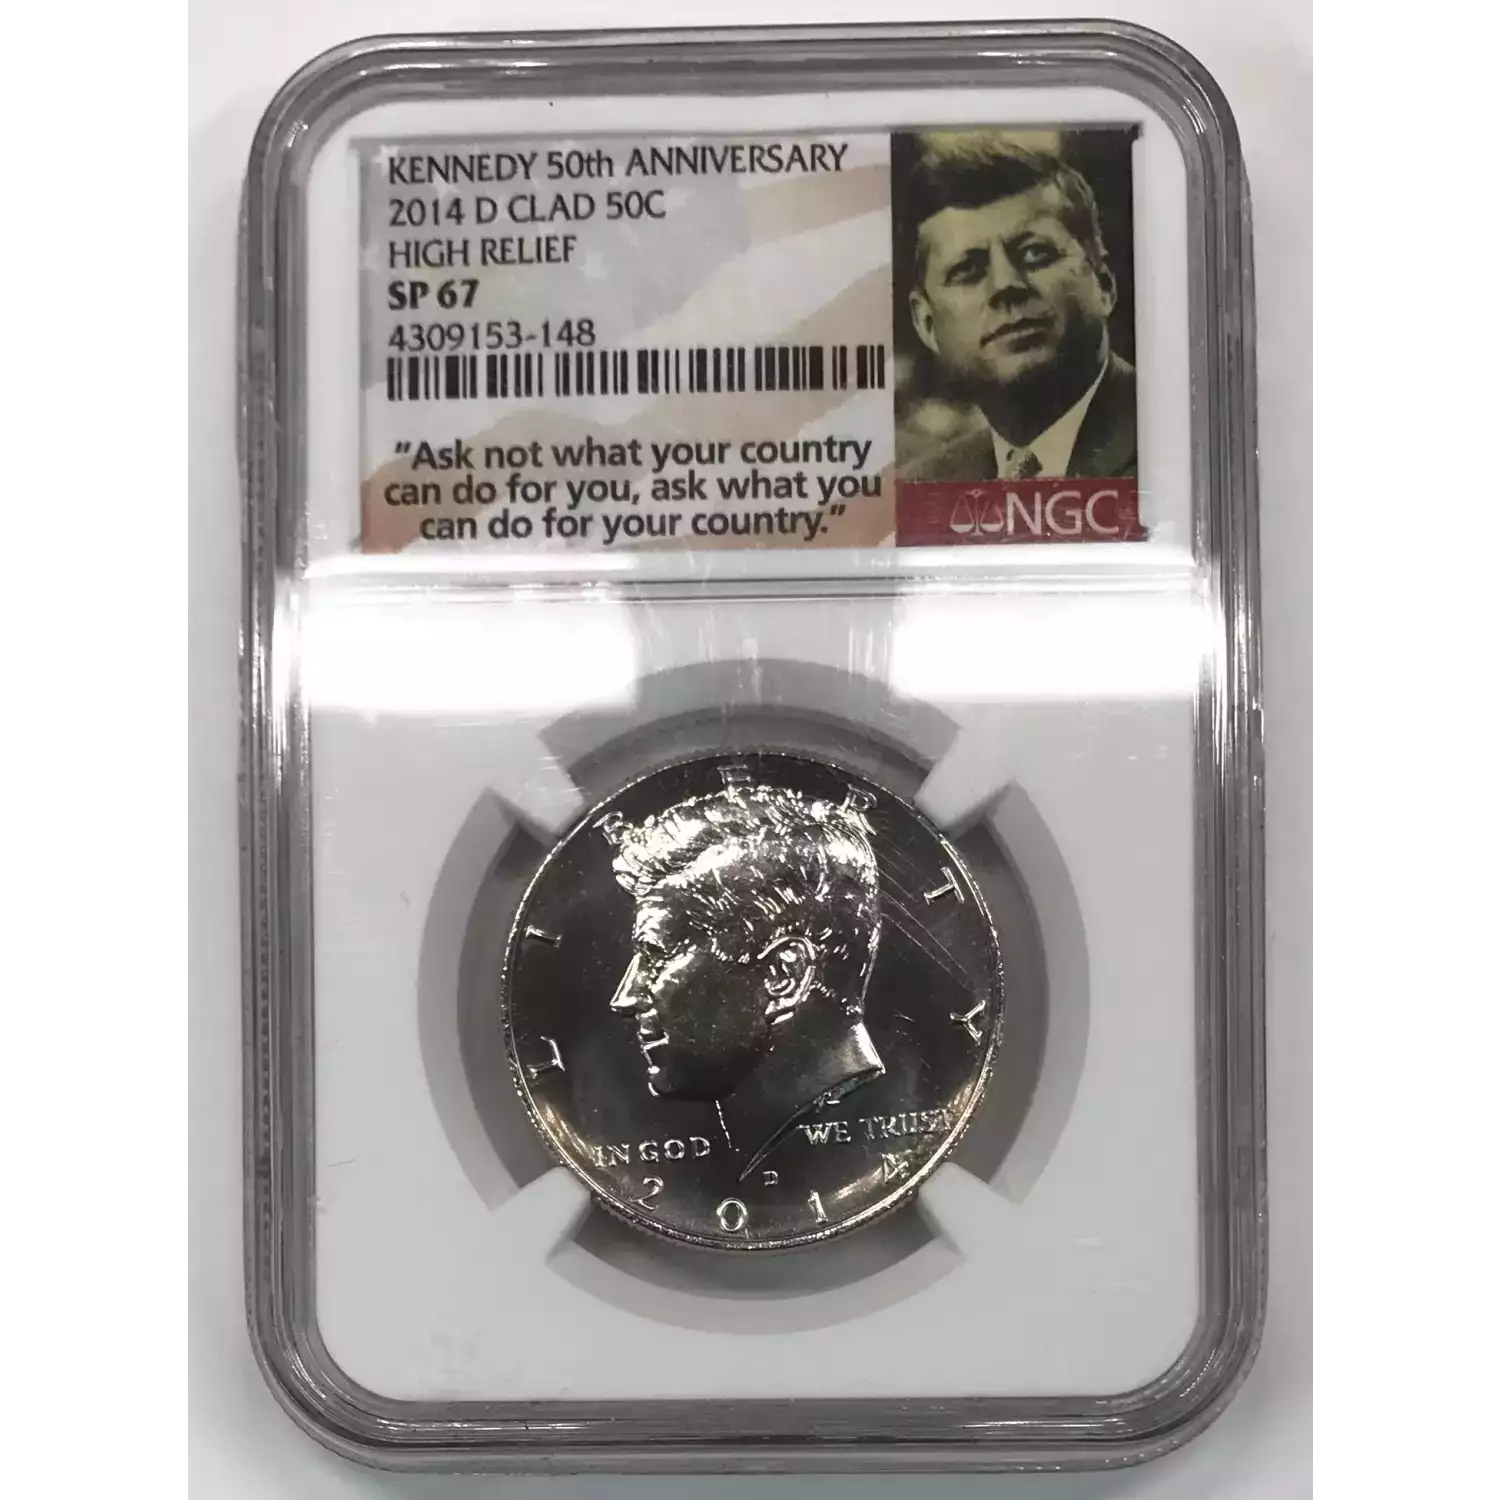 2014 D HIGH RELIEF KENNEDY 50th ANNIVERSARY  (3)